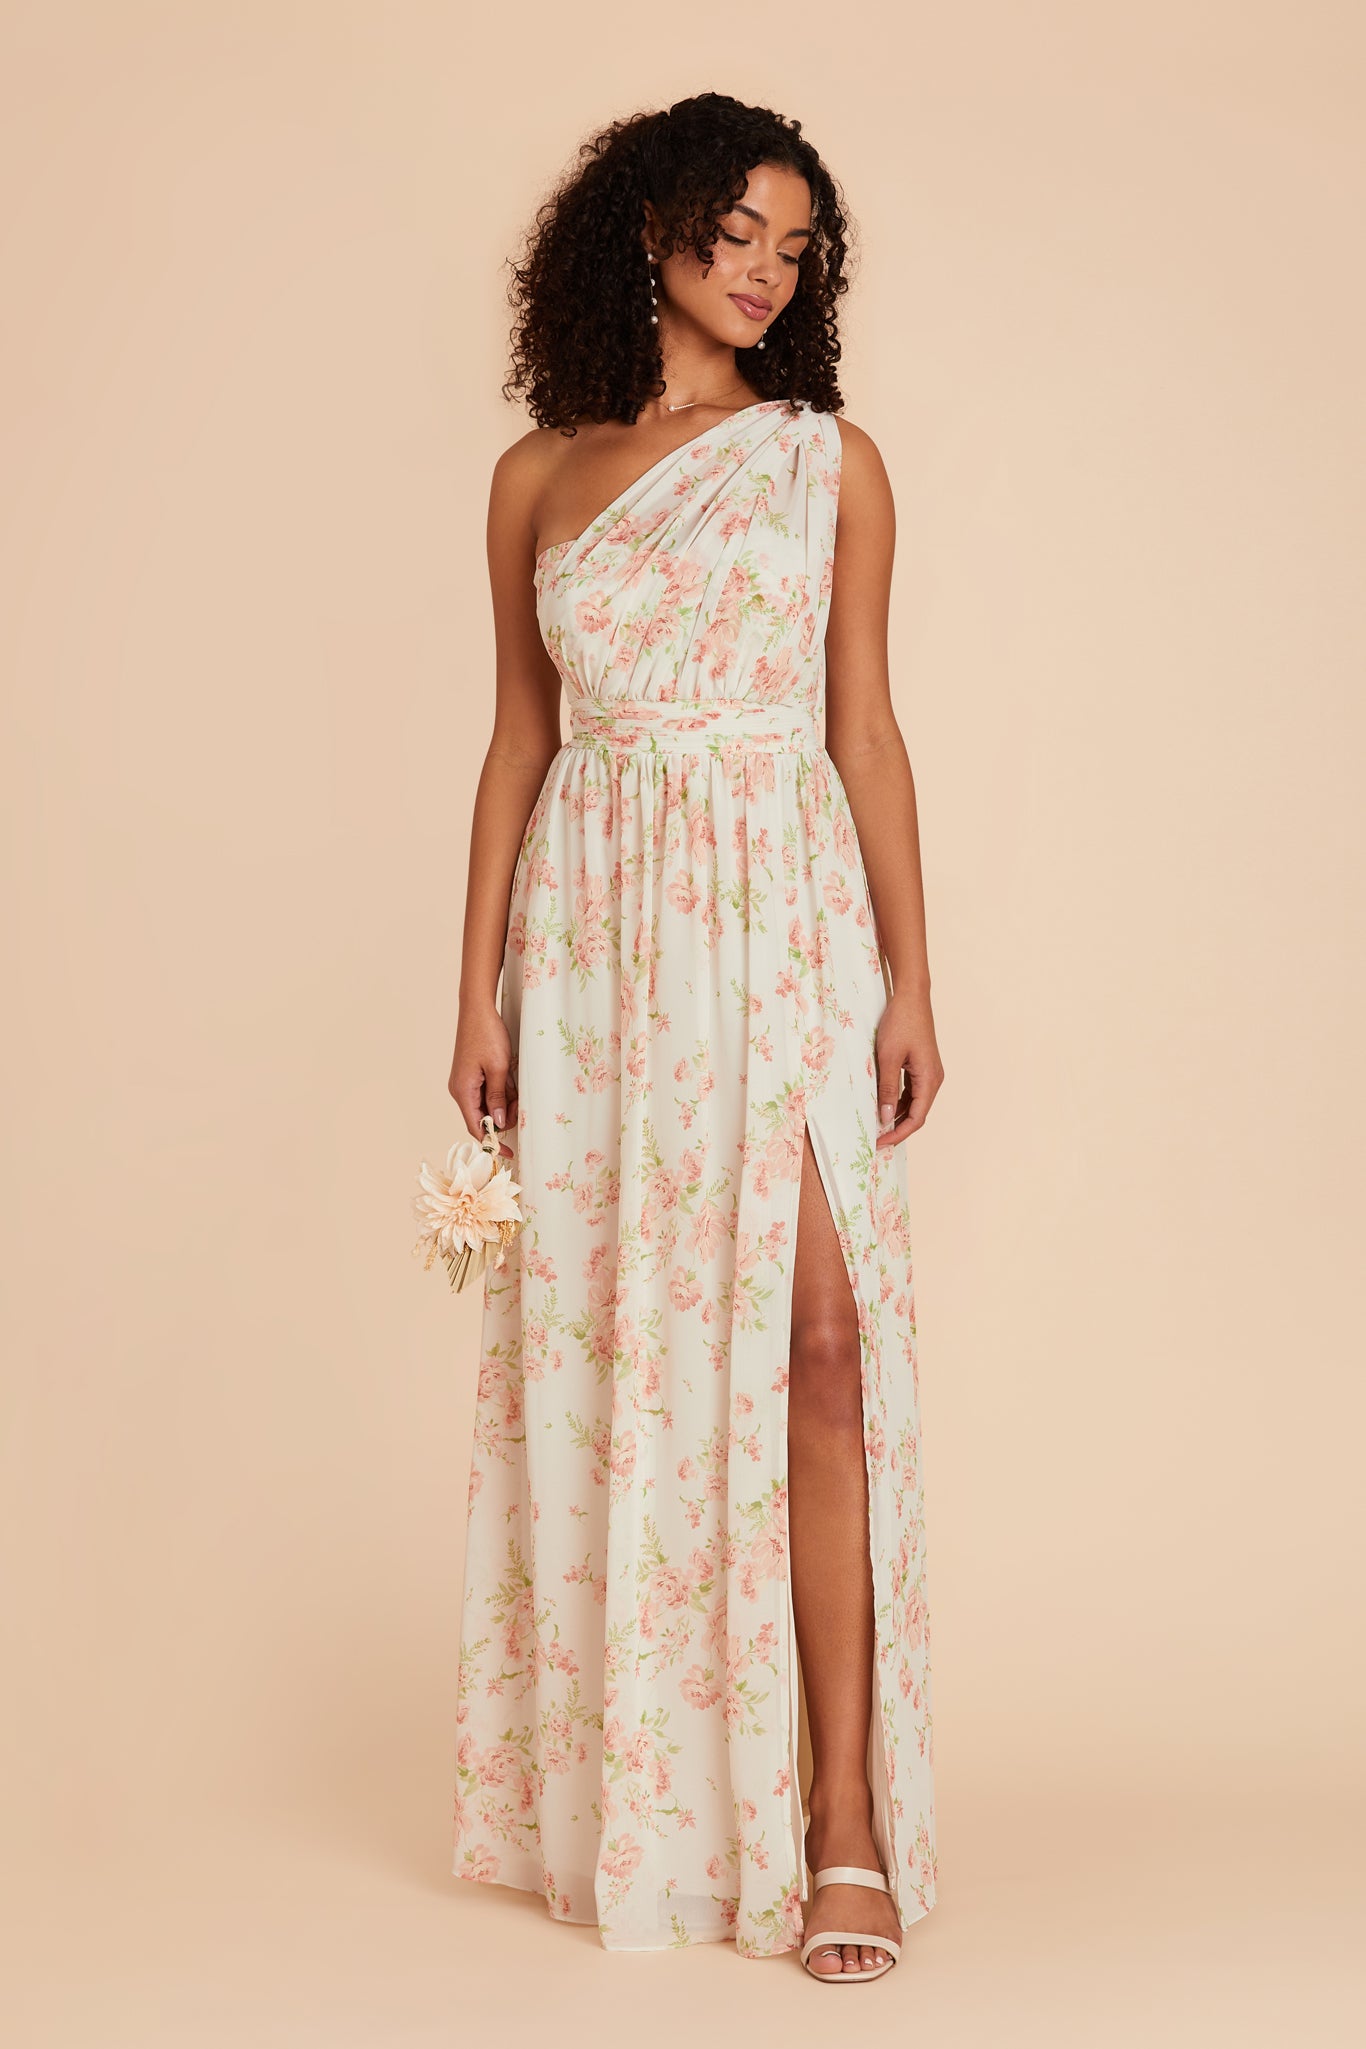 Grace Convertible Dress - Whimsical Blooms